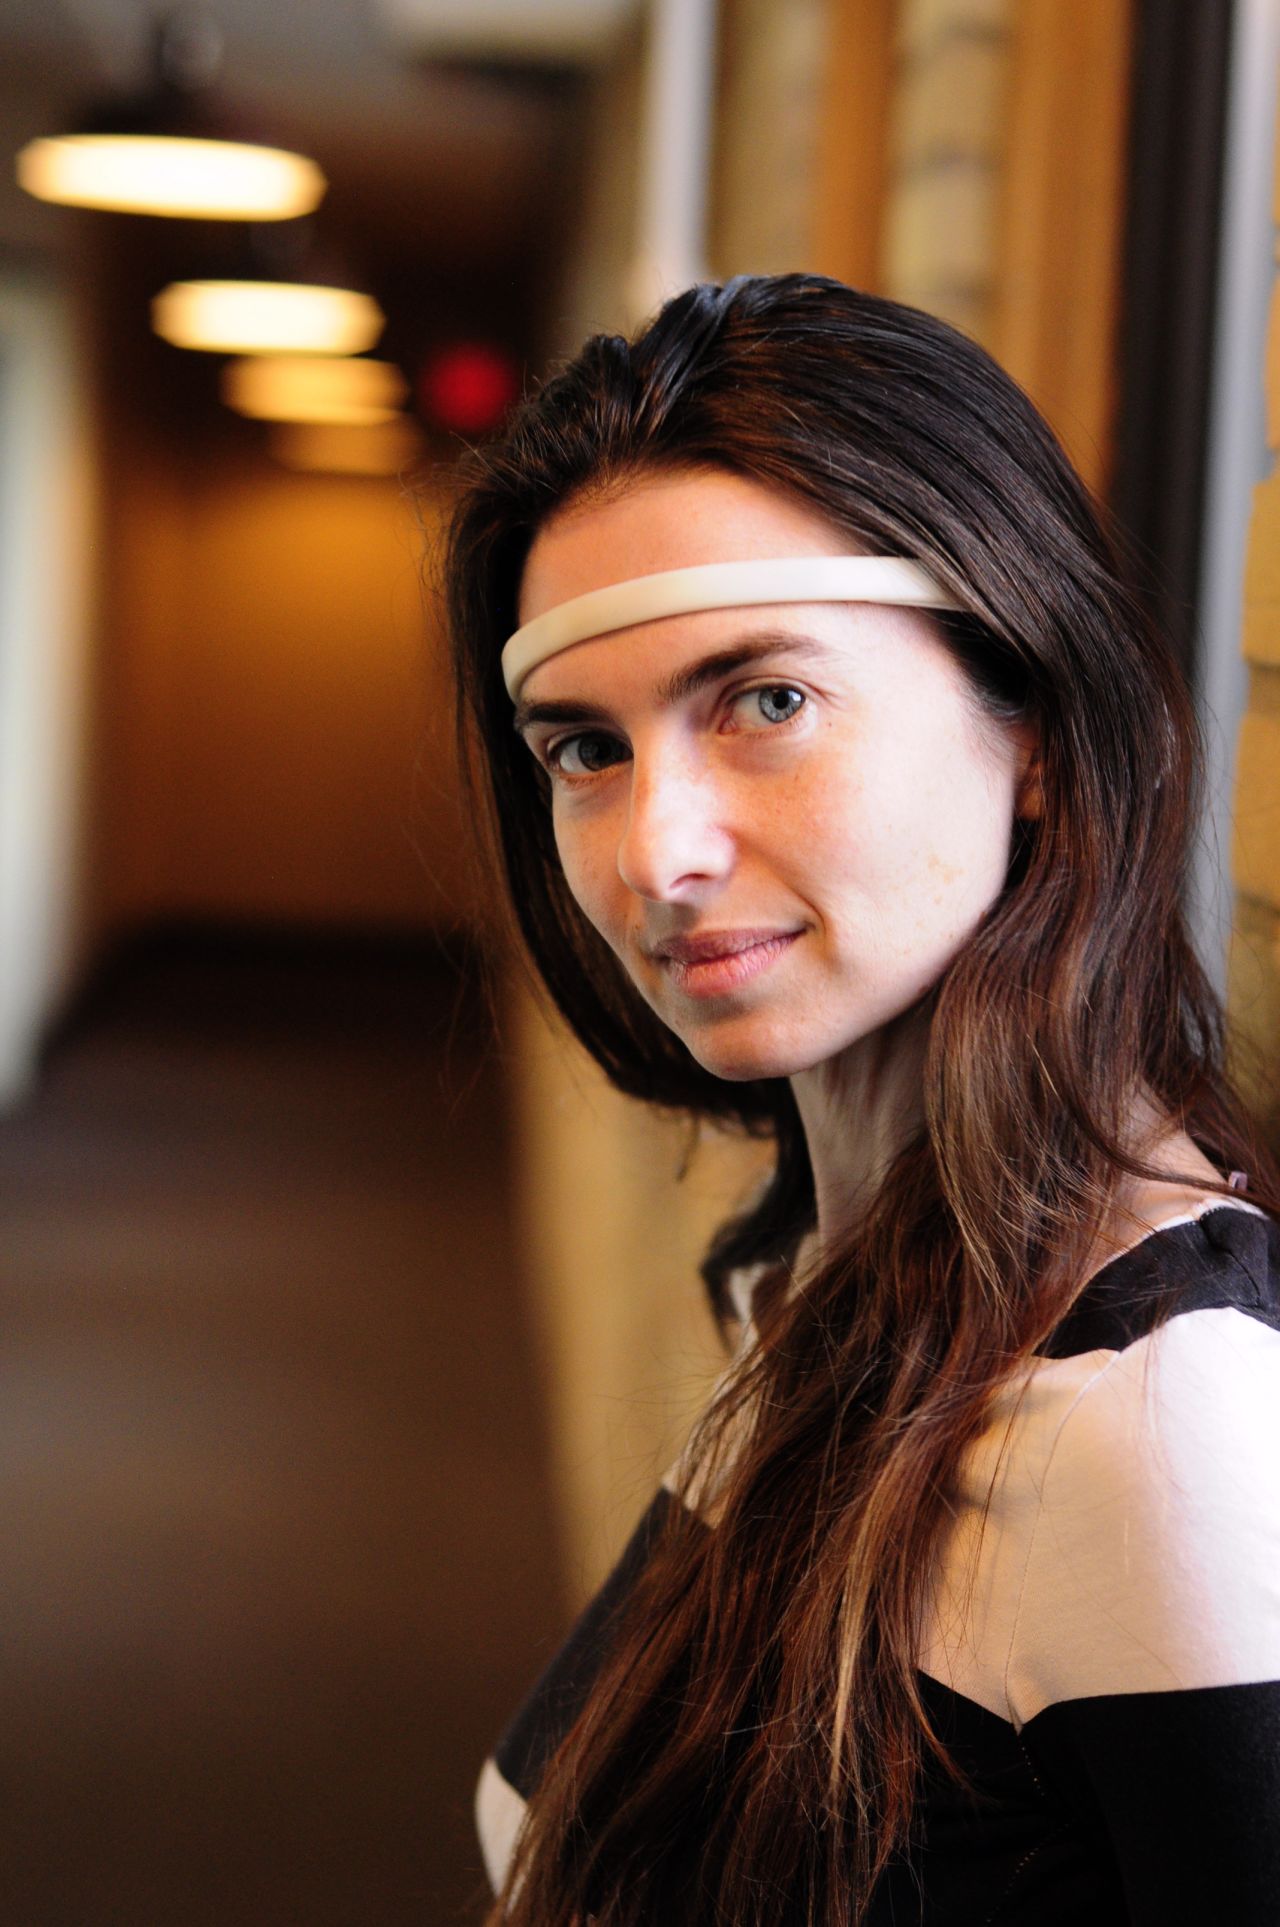 Meet Ariel Garten: 35-year-old CEO of tech company InteraXon. The business has created a headband which monitors brain activity, called 'Muse.' It claims to help reduce stress as the user focuses on their brain waves, which appear on a screen. 